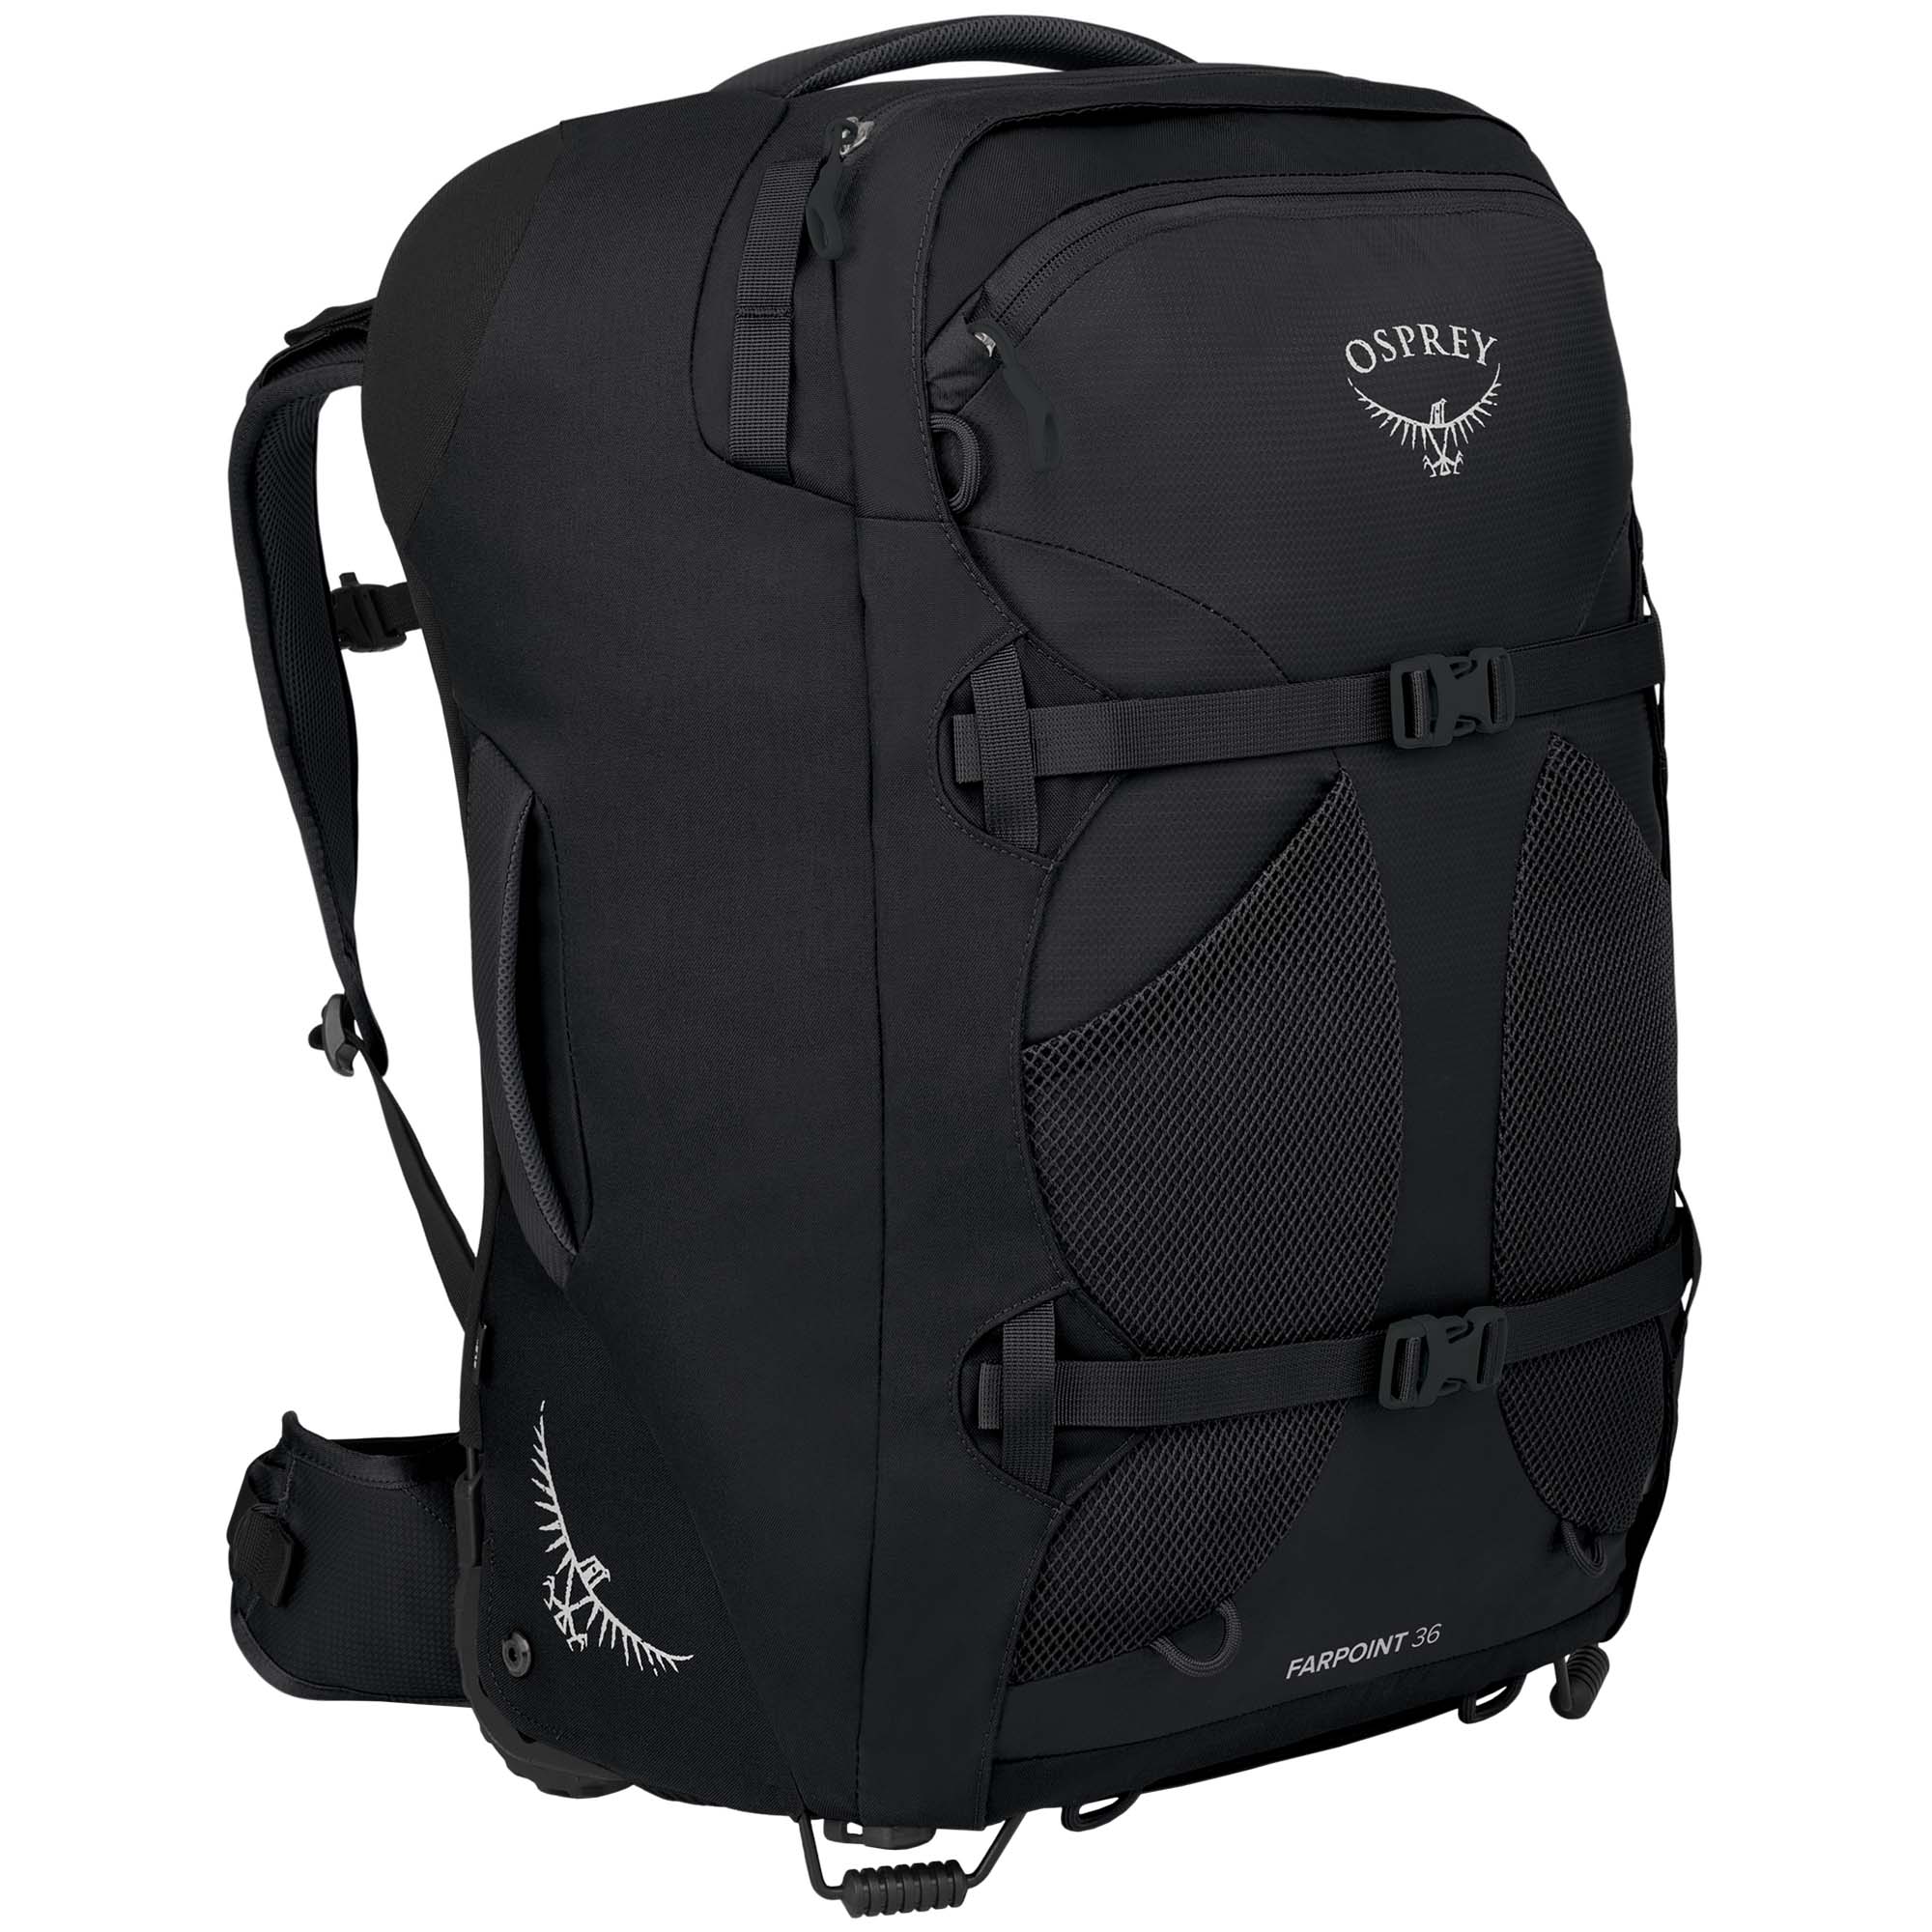 Osprey Farpoint 36 Wheeled Travel Pack/Backpack